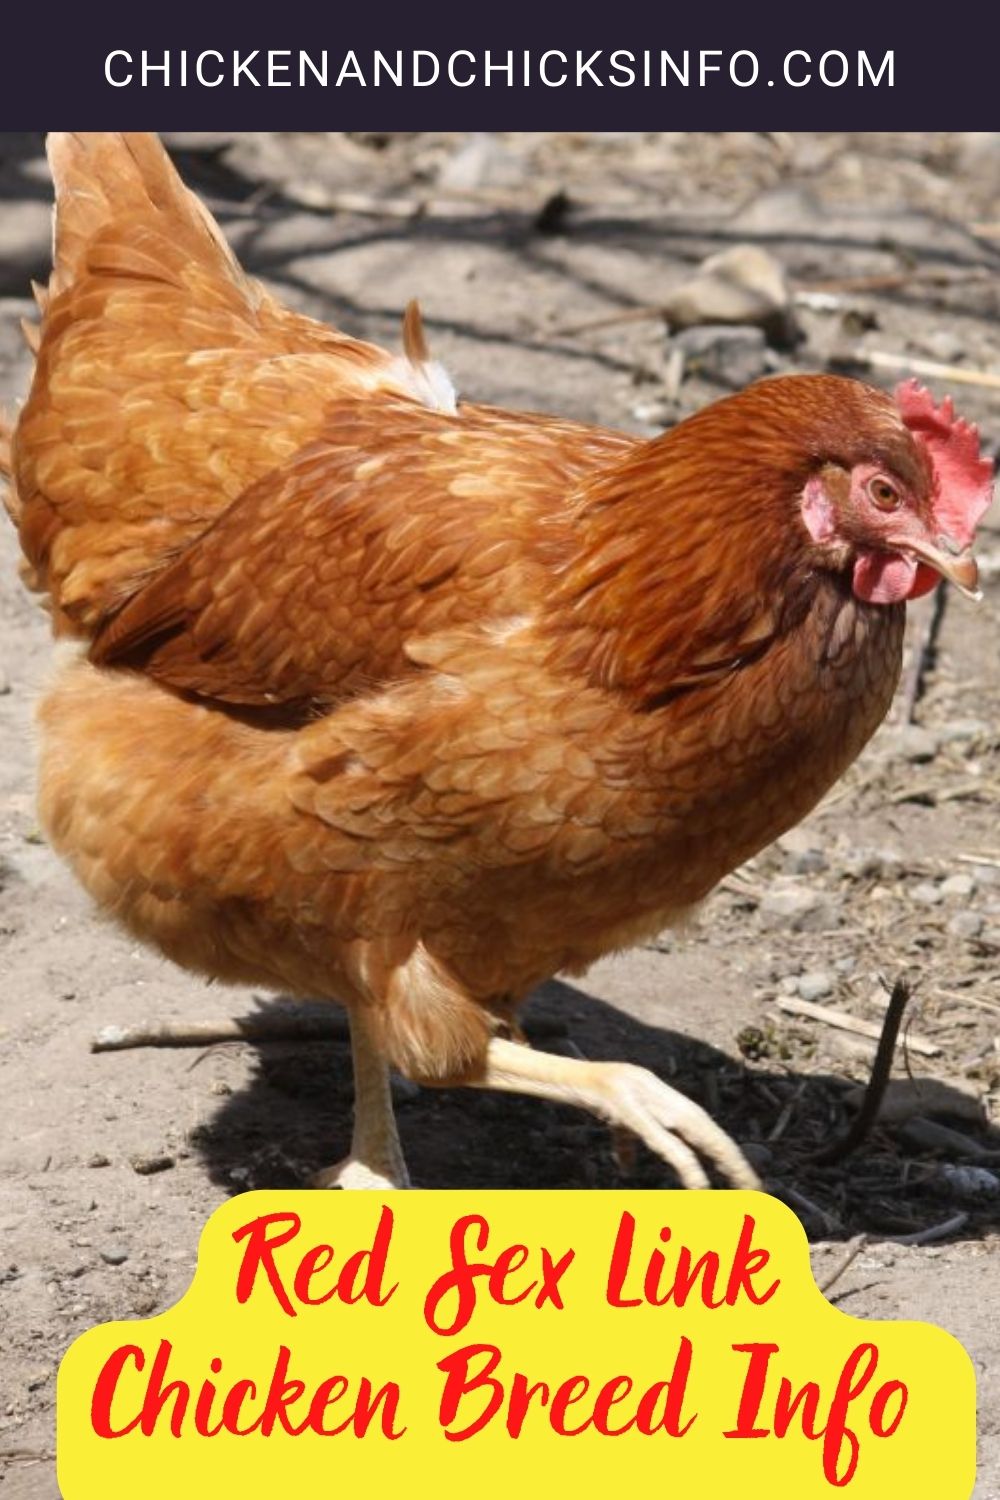 Red Sex Link Chicken Breed Info + Where to Buy pinterest image.